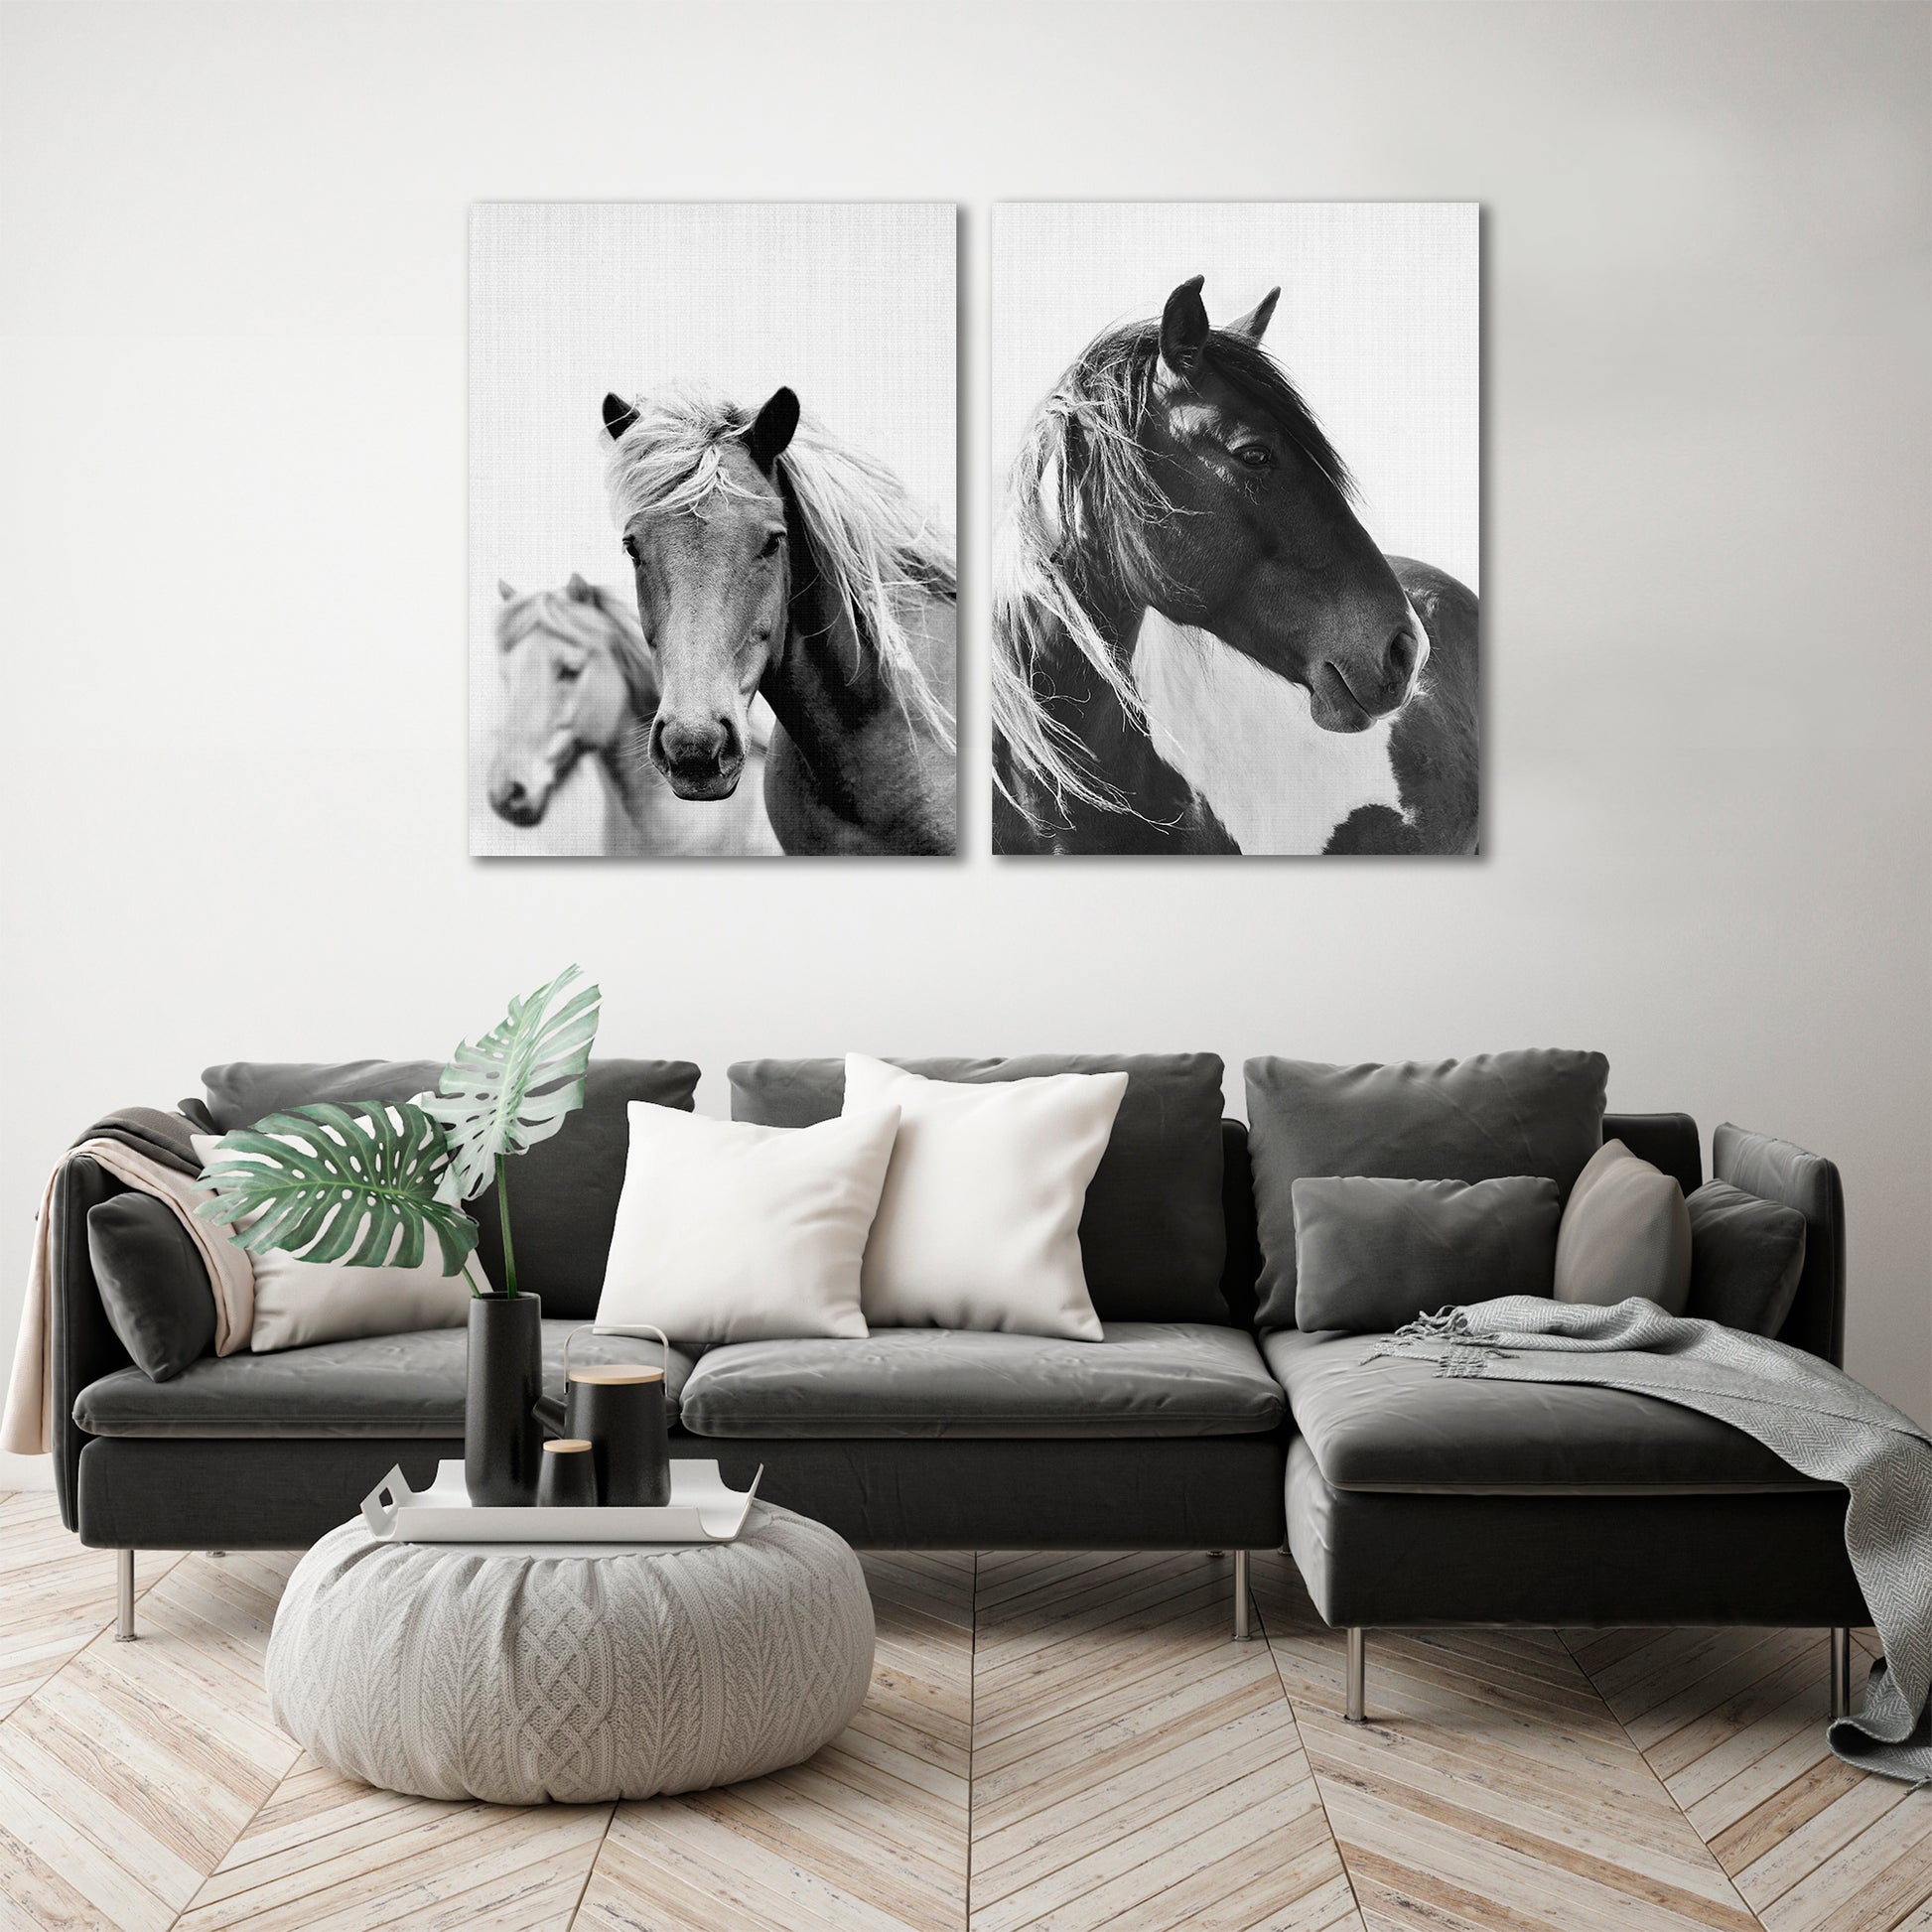  Wild Horses by LILA + LOLA - 2 Piece Wrapped Canvas Set - Art Set - Americanflat